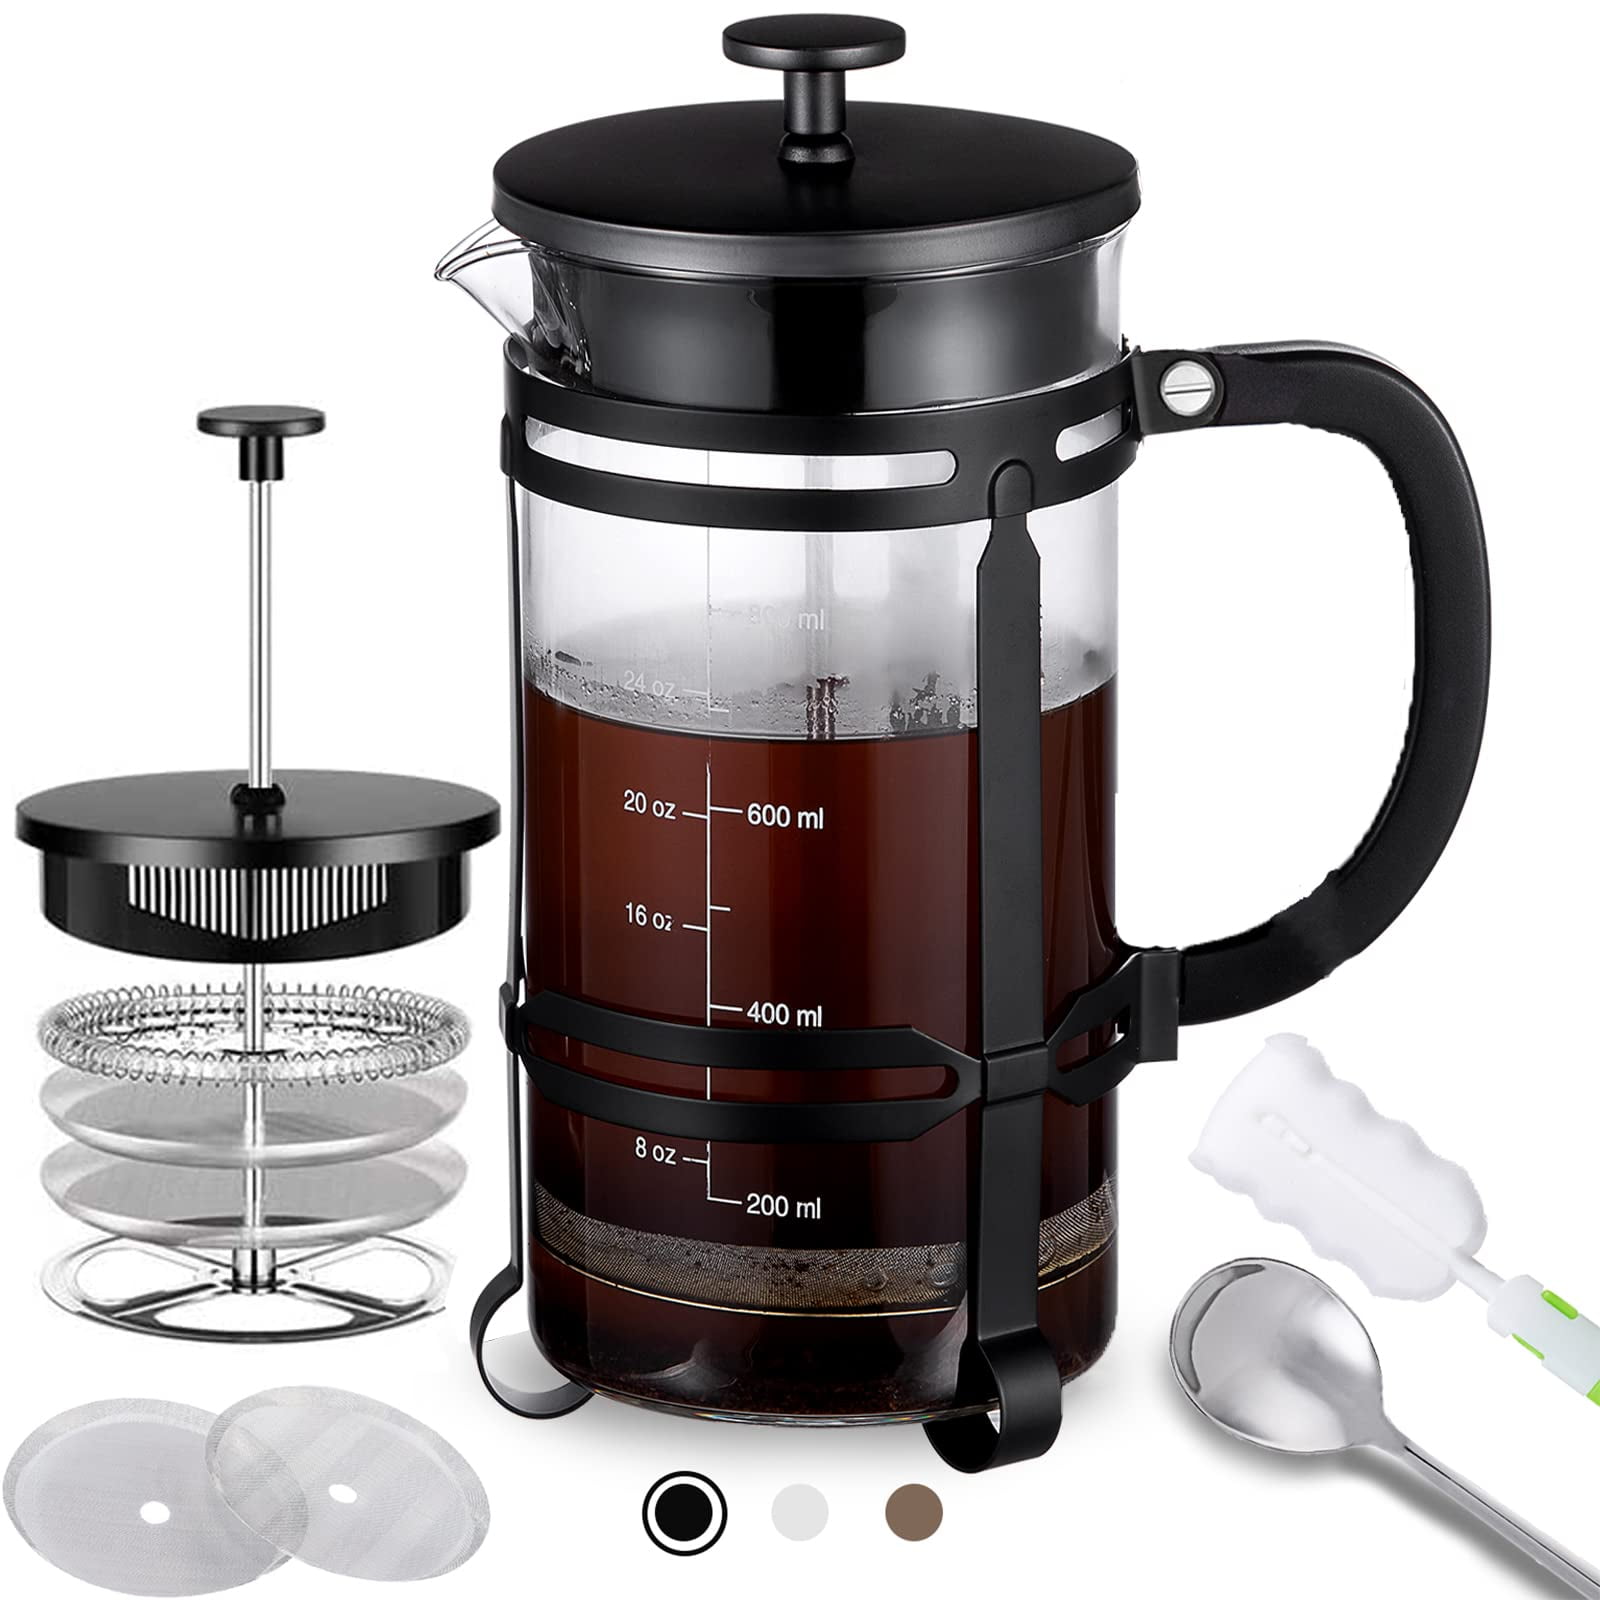 Navaris French Press Coffee Maker - 24 oz / 3 Cup Borosilicate Glass and Real Wood Coffee Press and Tea Maker Pot with Handle